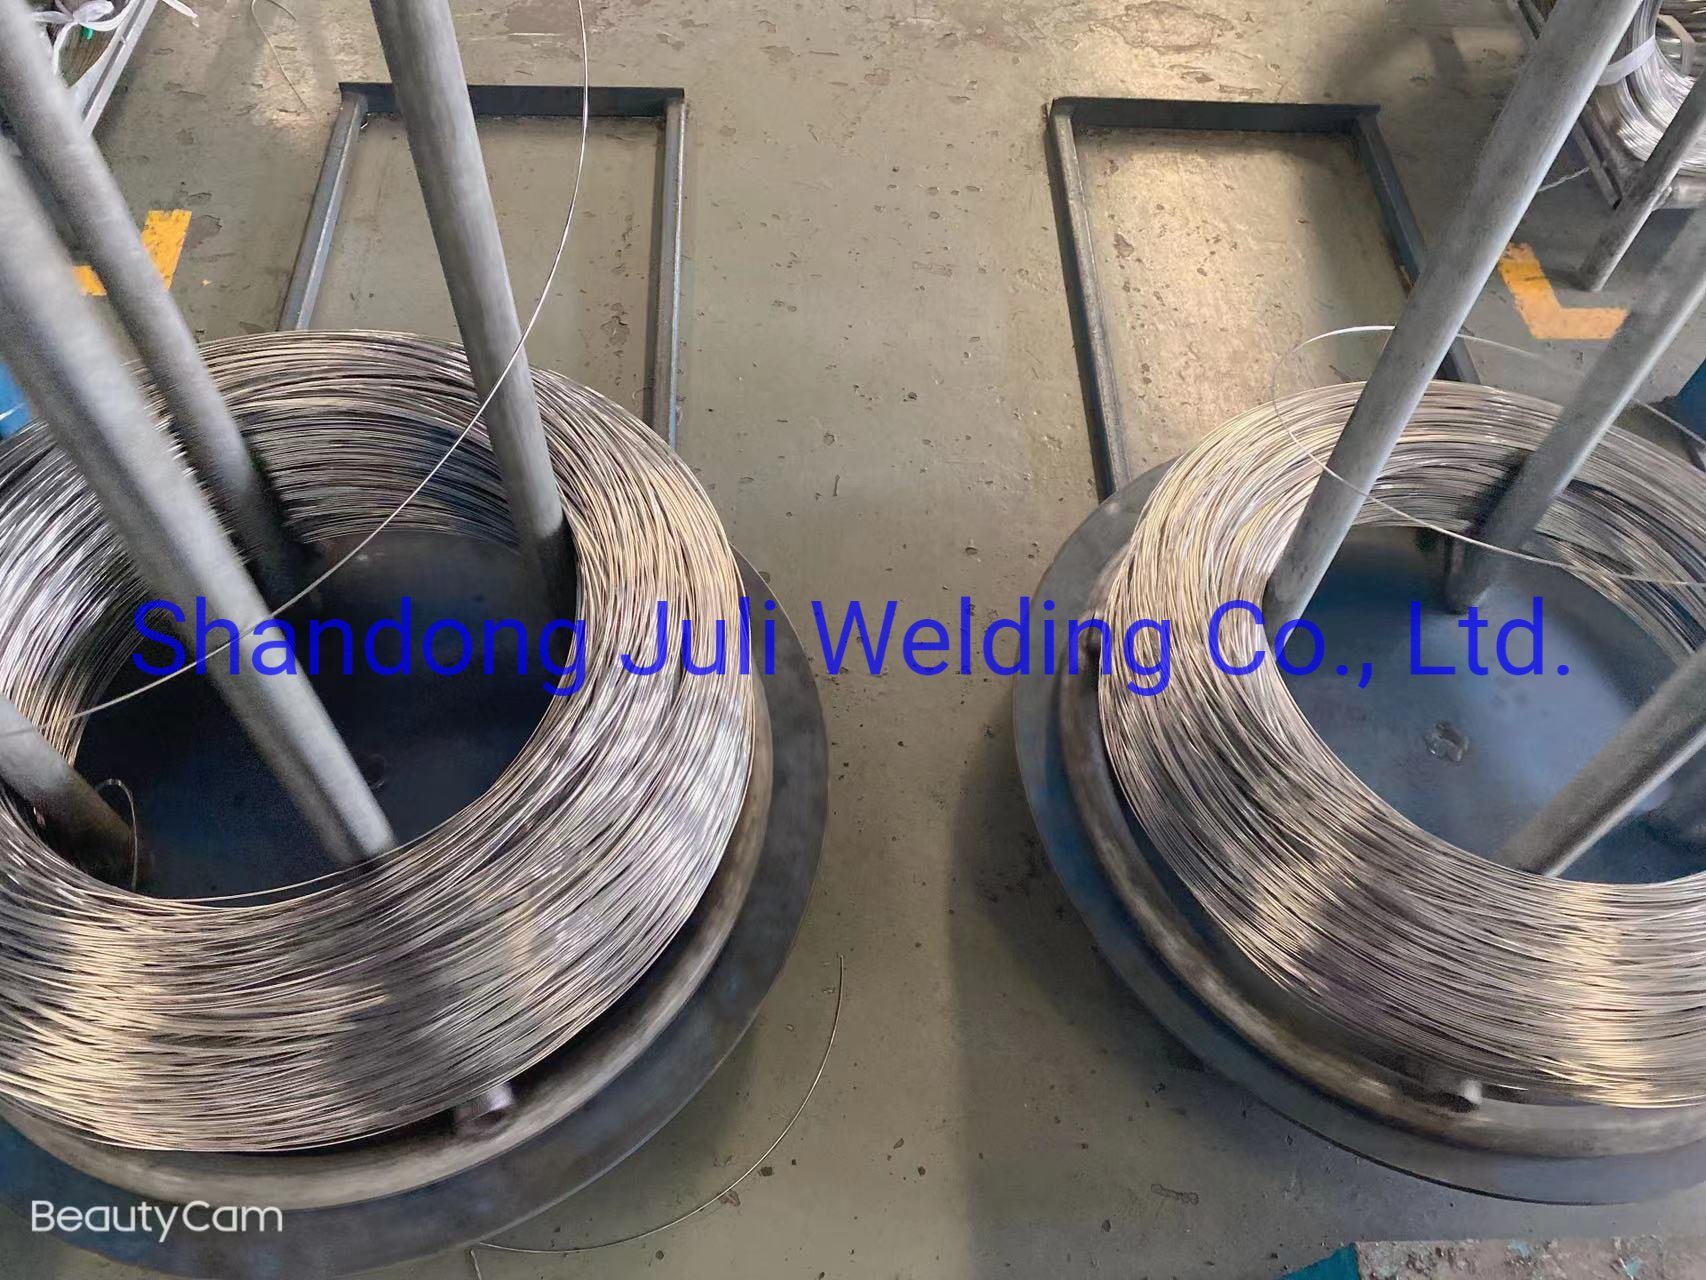 Conveying Net Use High-Speed High Strength Quality Low Price Smooth Stainless Steel Wea Stainless Steel Weaving Wire Braiding Wire